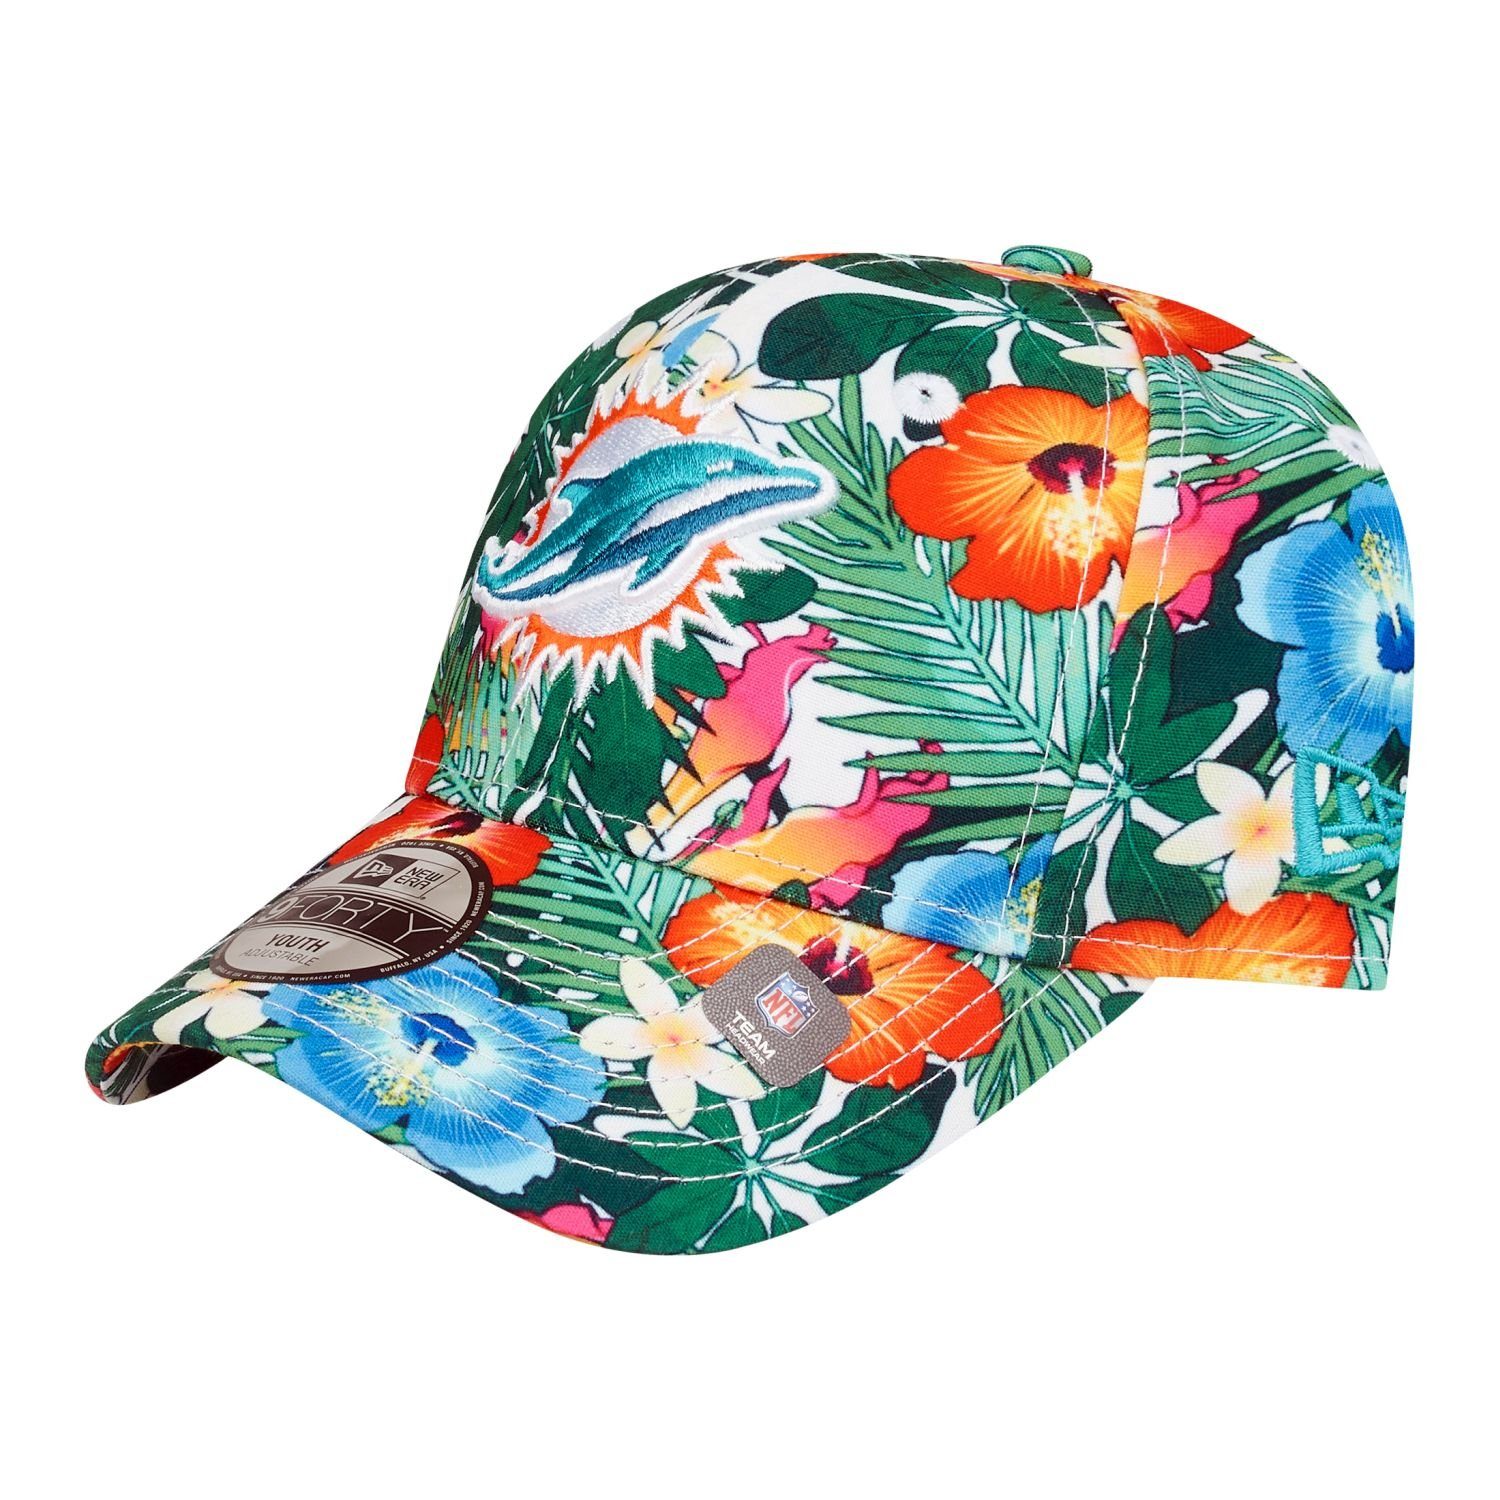 New Era Baseball Cap NFL 9Forty Dolphins Miami floral